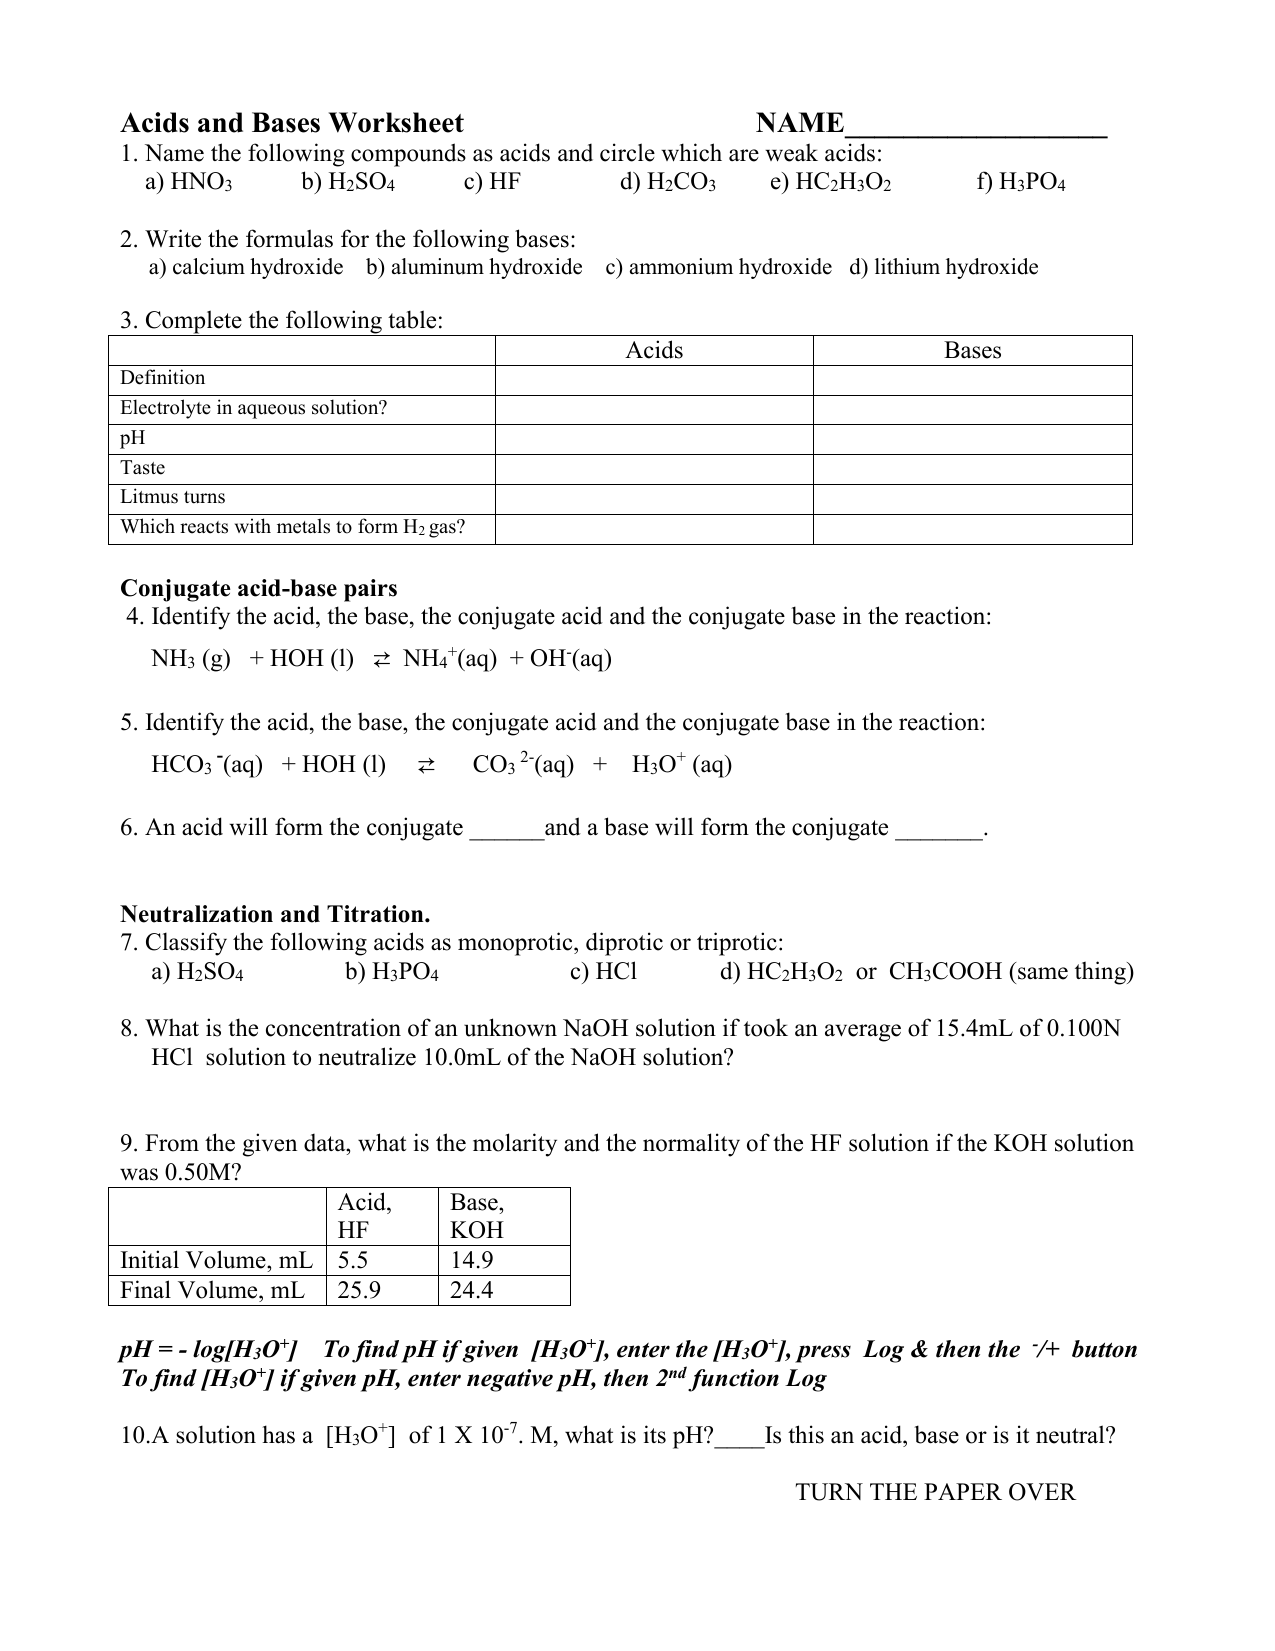 Acids and Bases Worksheet For Acid And Base Worksheet Answers